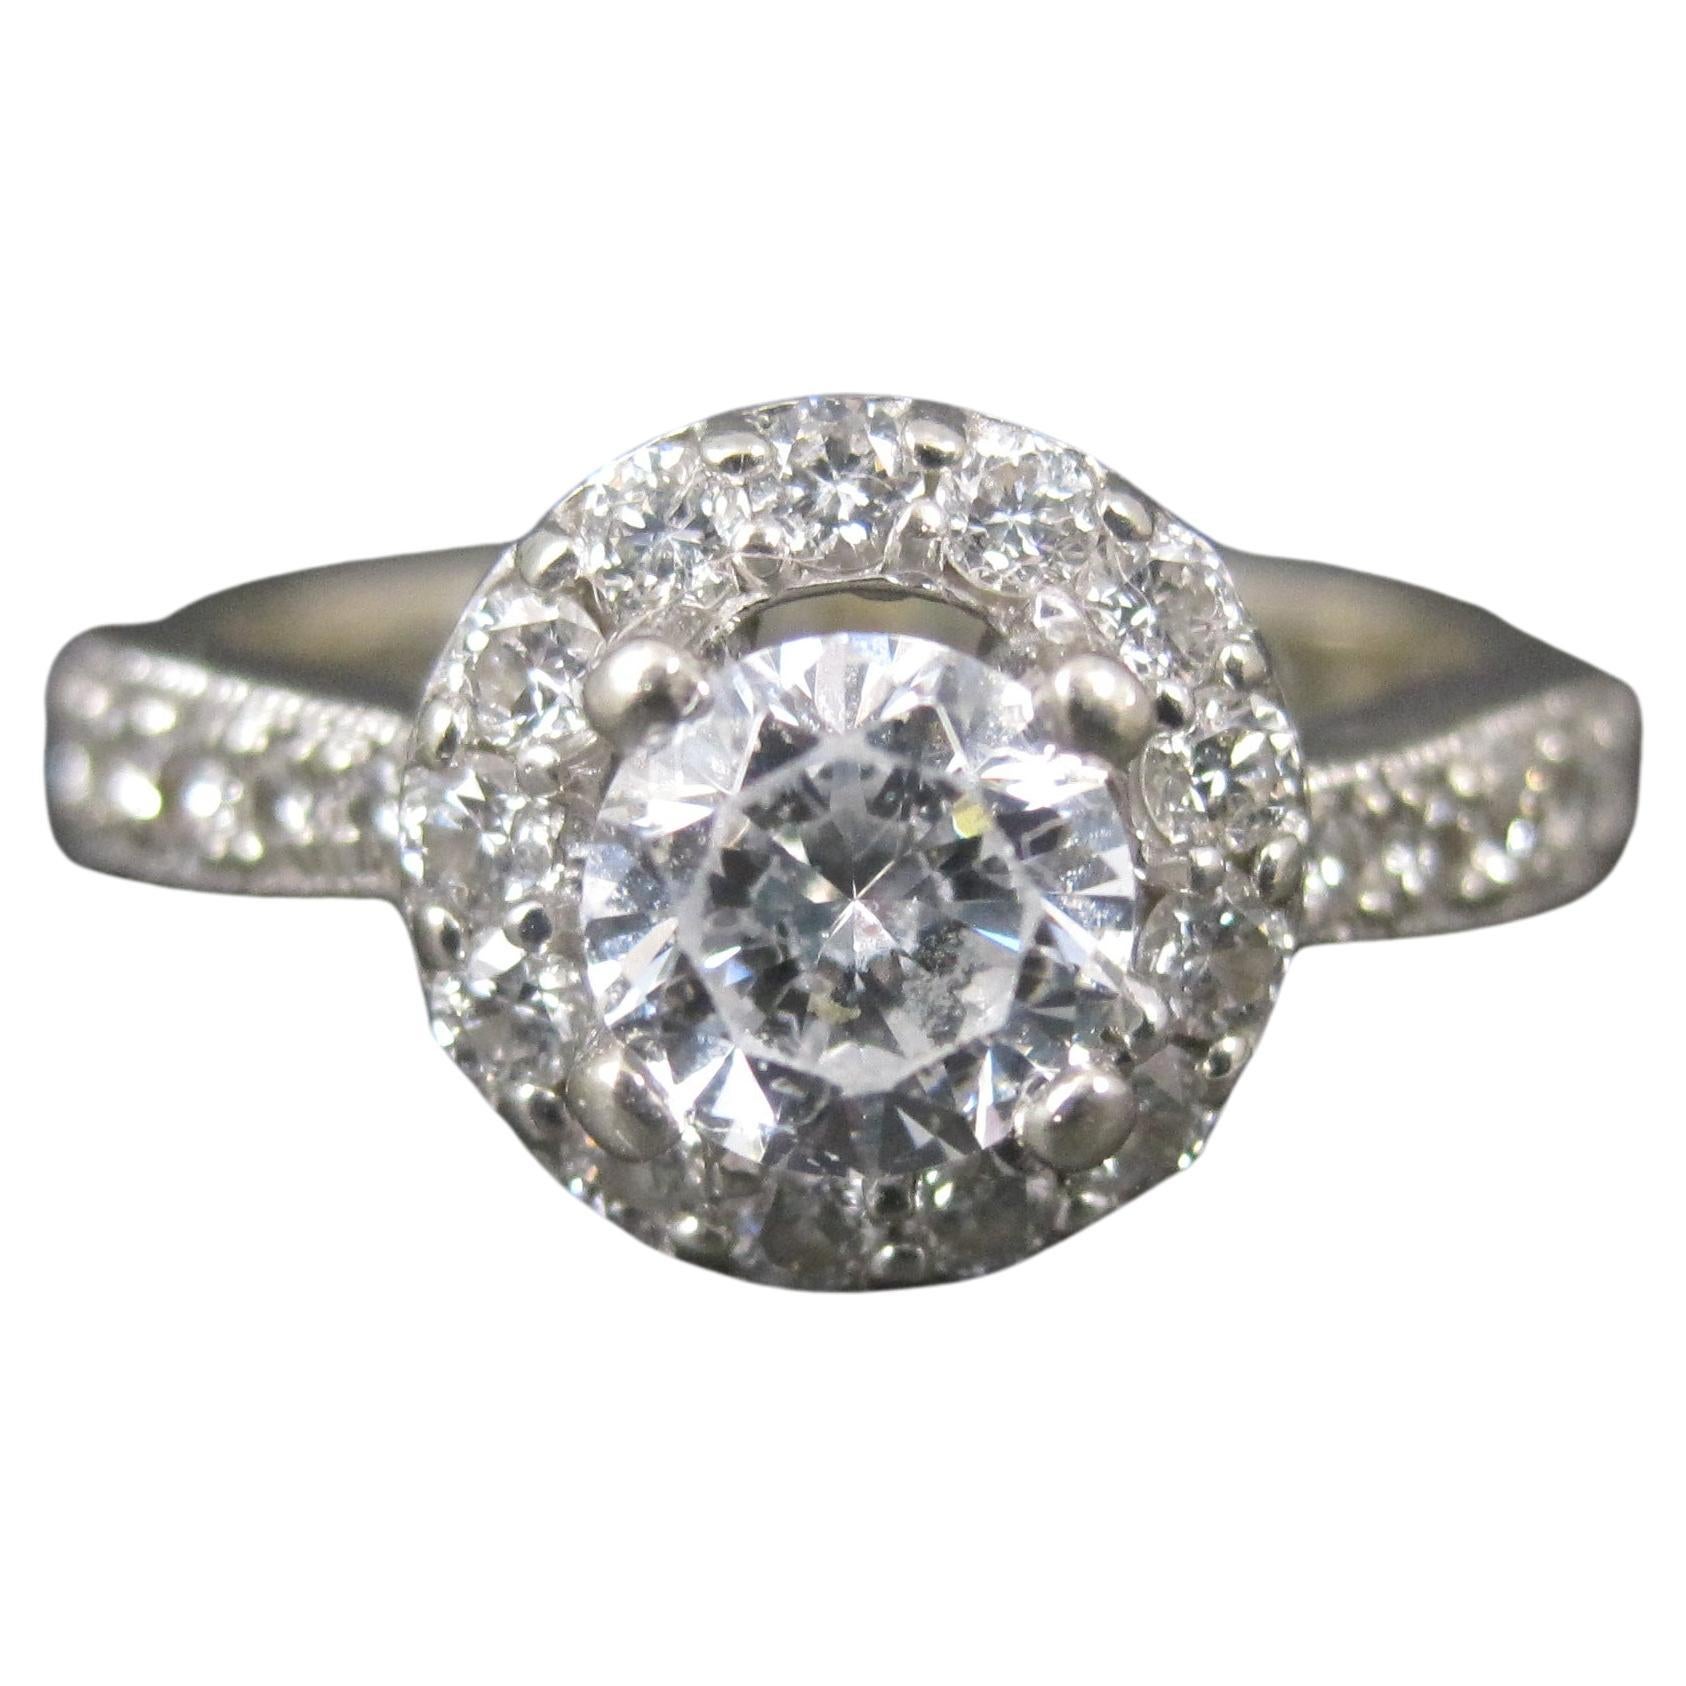 14K Diamond Halo Engagement Ring Size 5.5 Finelli For Sale